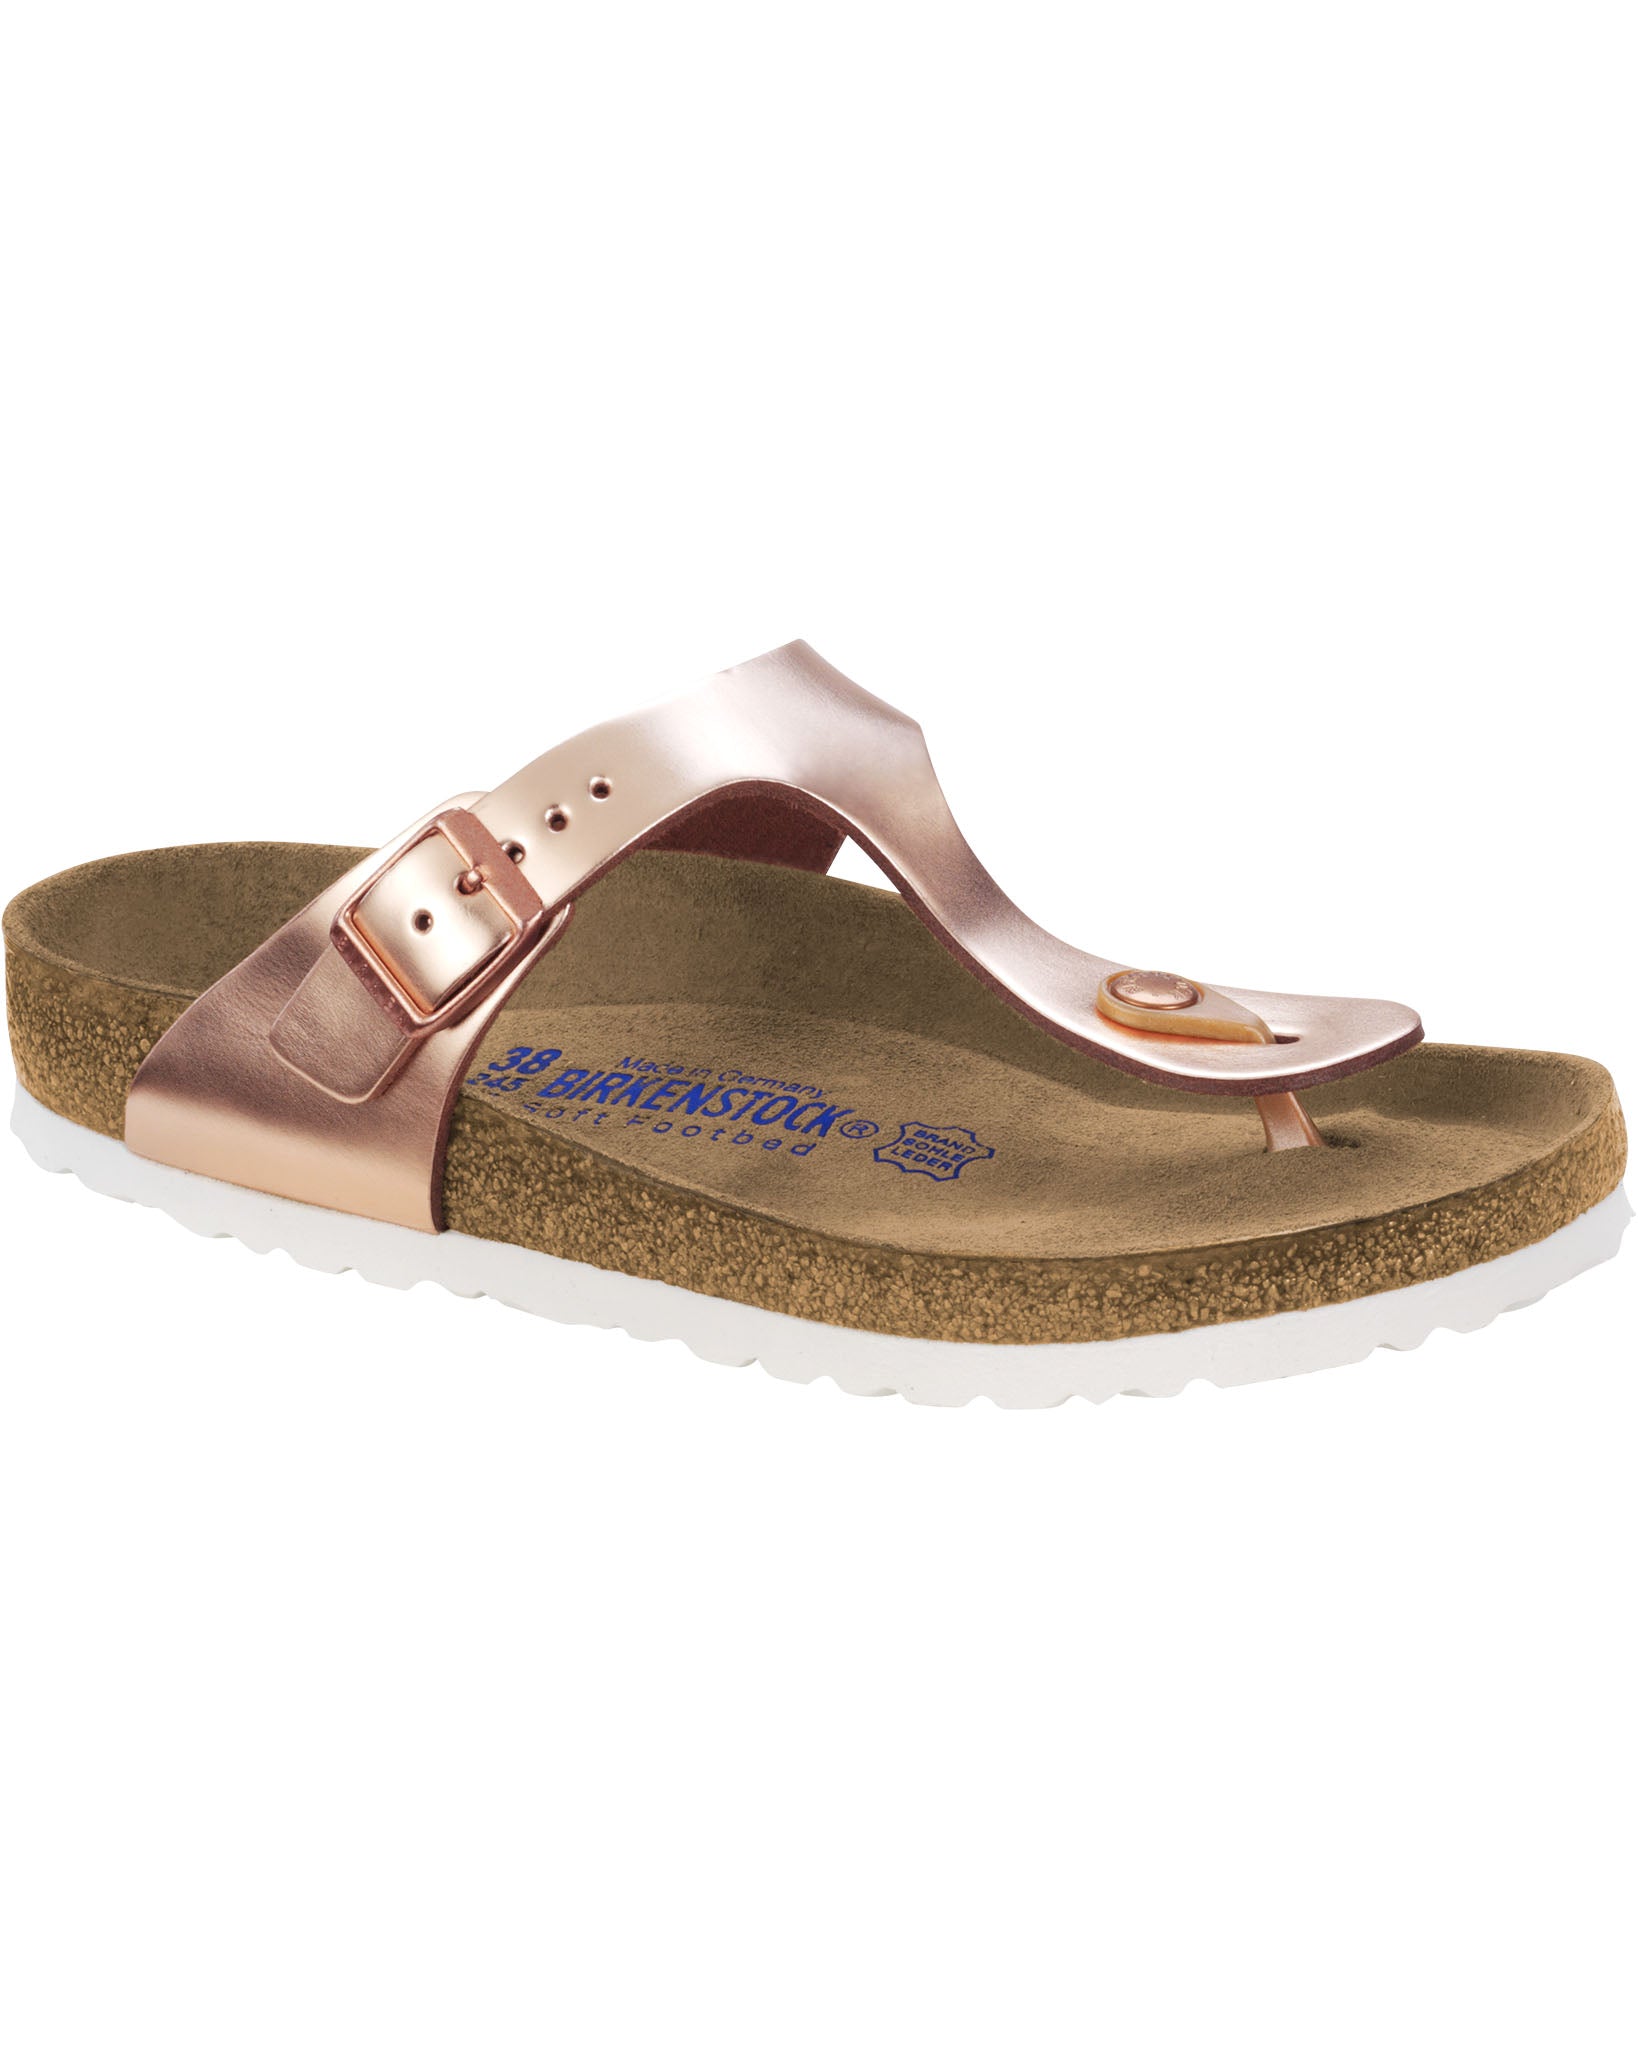 Gizeh Soft Footbed Metallic Copper Leather Sandals